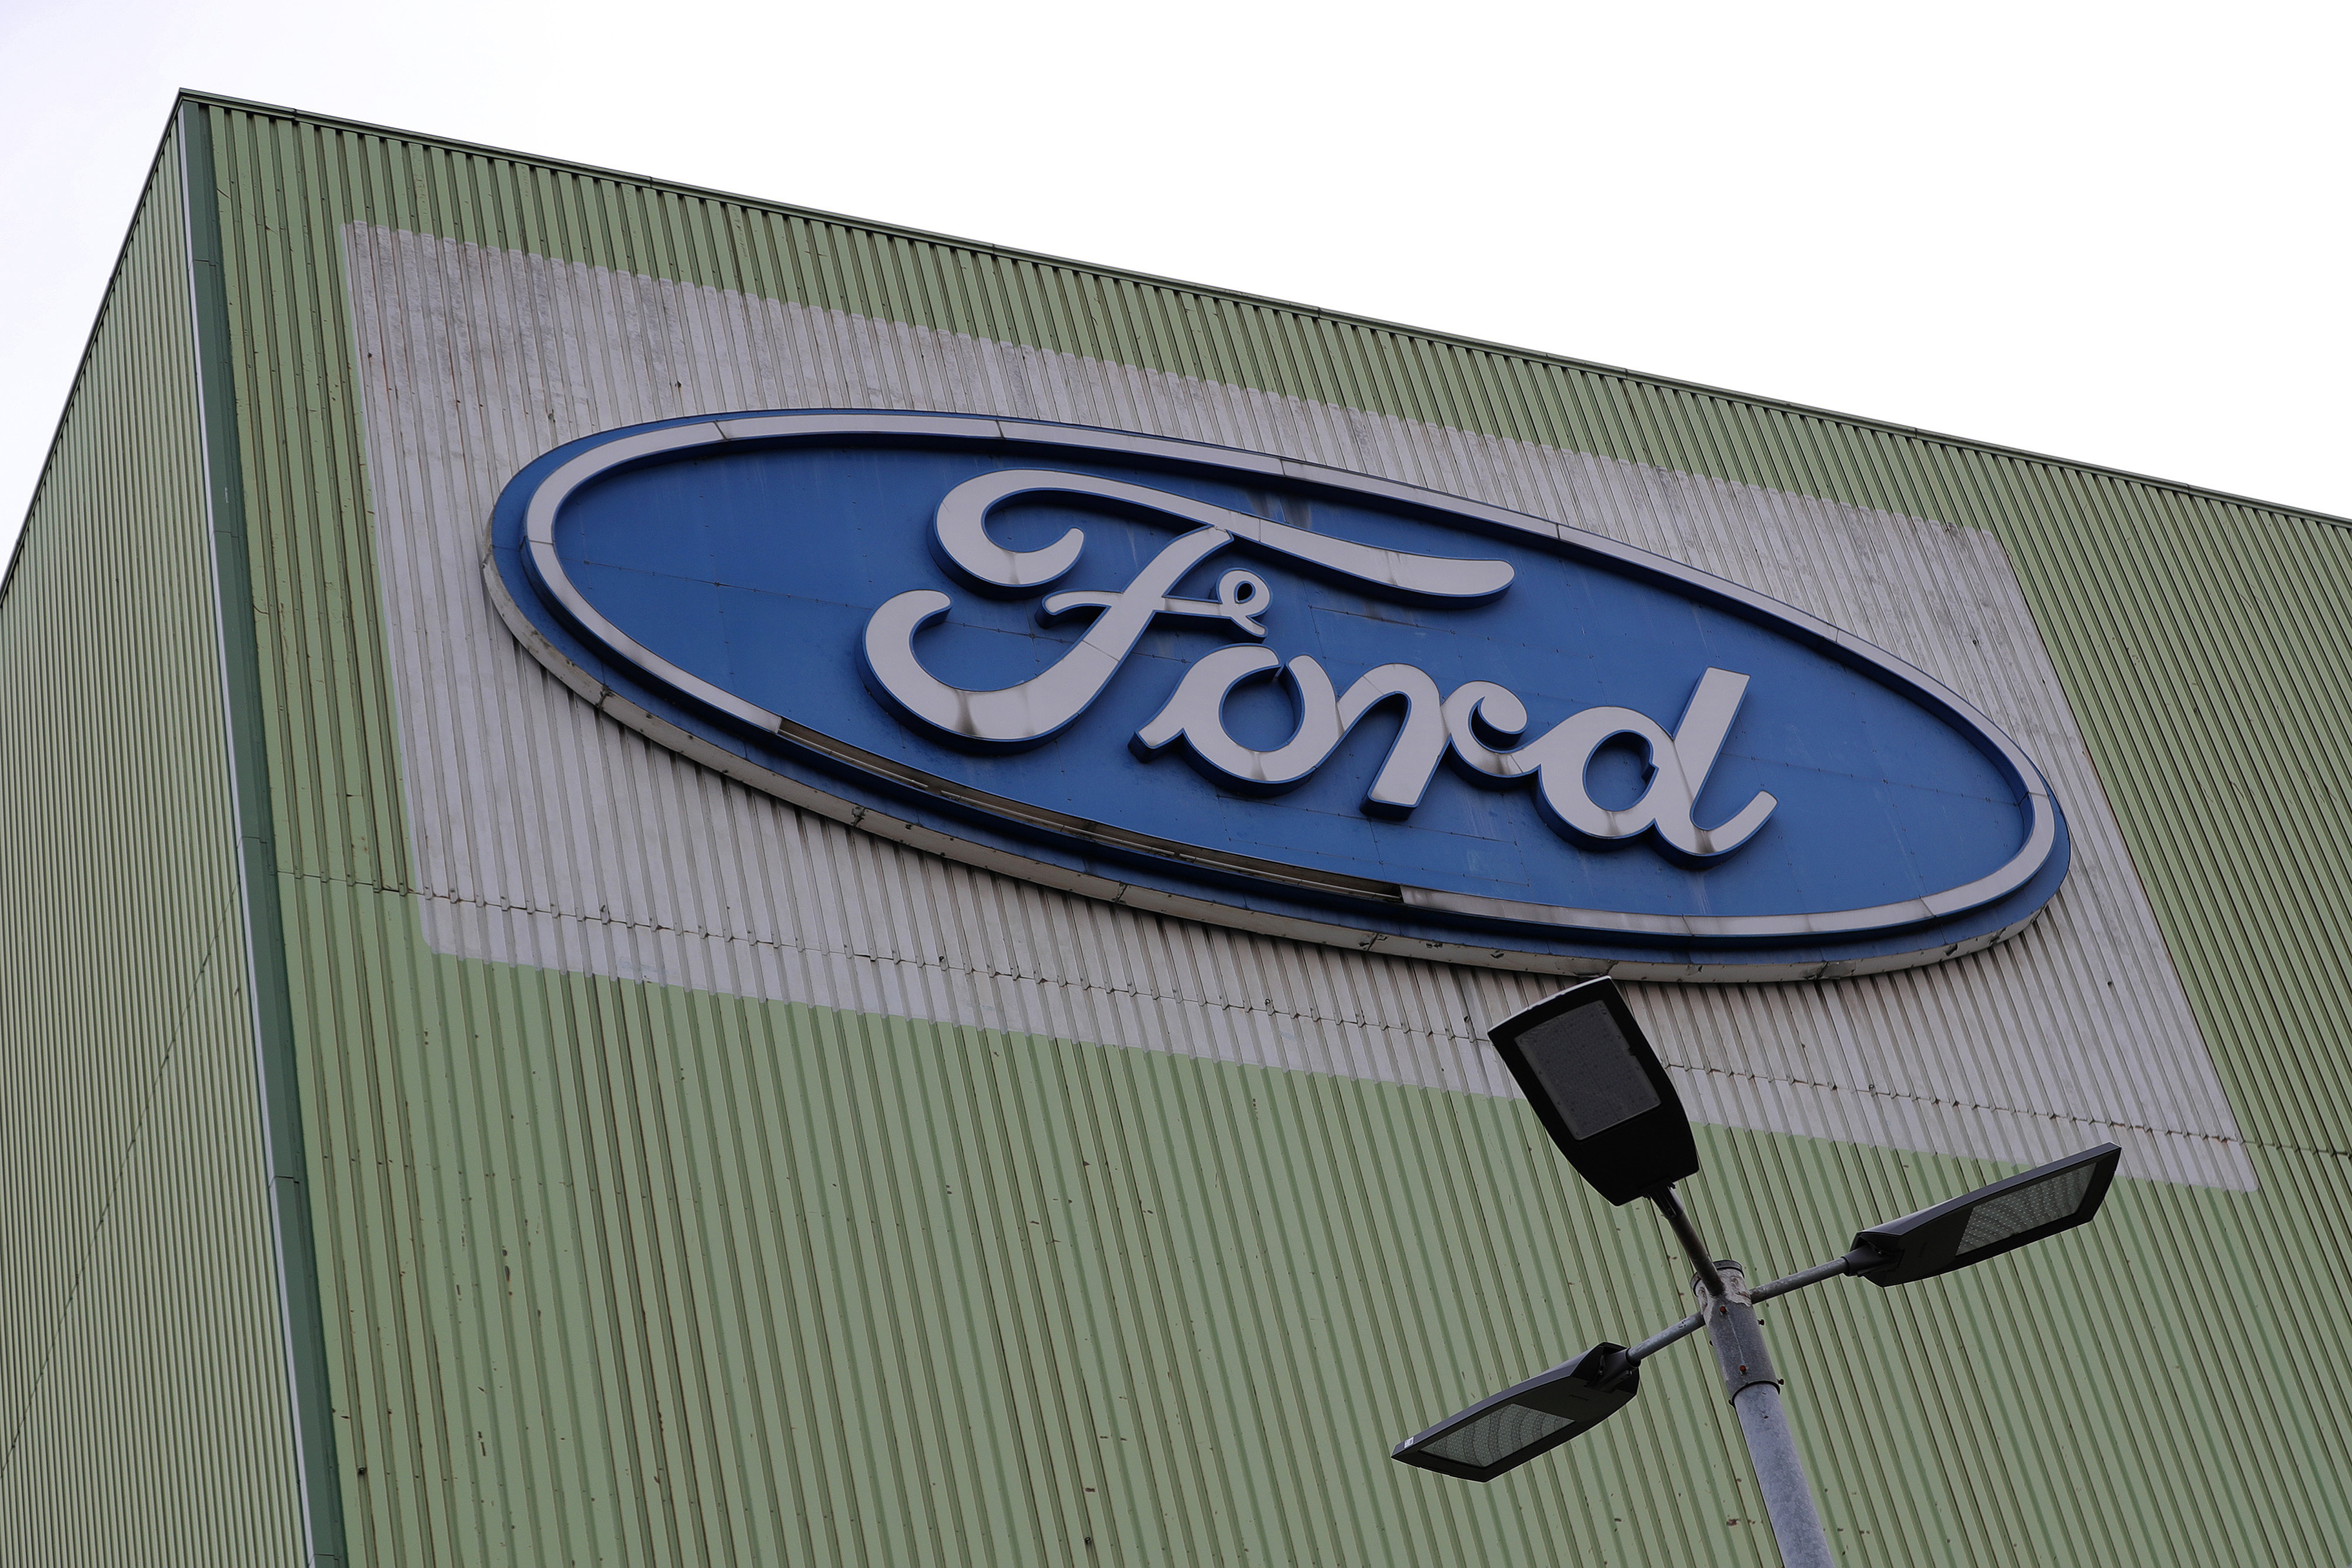 The Ford Motor Co. logo sits on the exterior of the automaker's factory in Cologne, Germany, on Wednesday, Feb. 13, 2019. Photographer: Krisztian Bocsi/Bloomberg